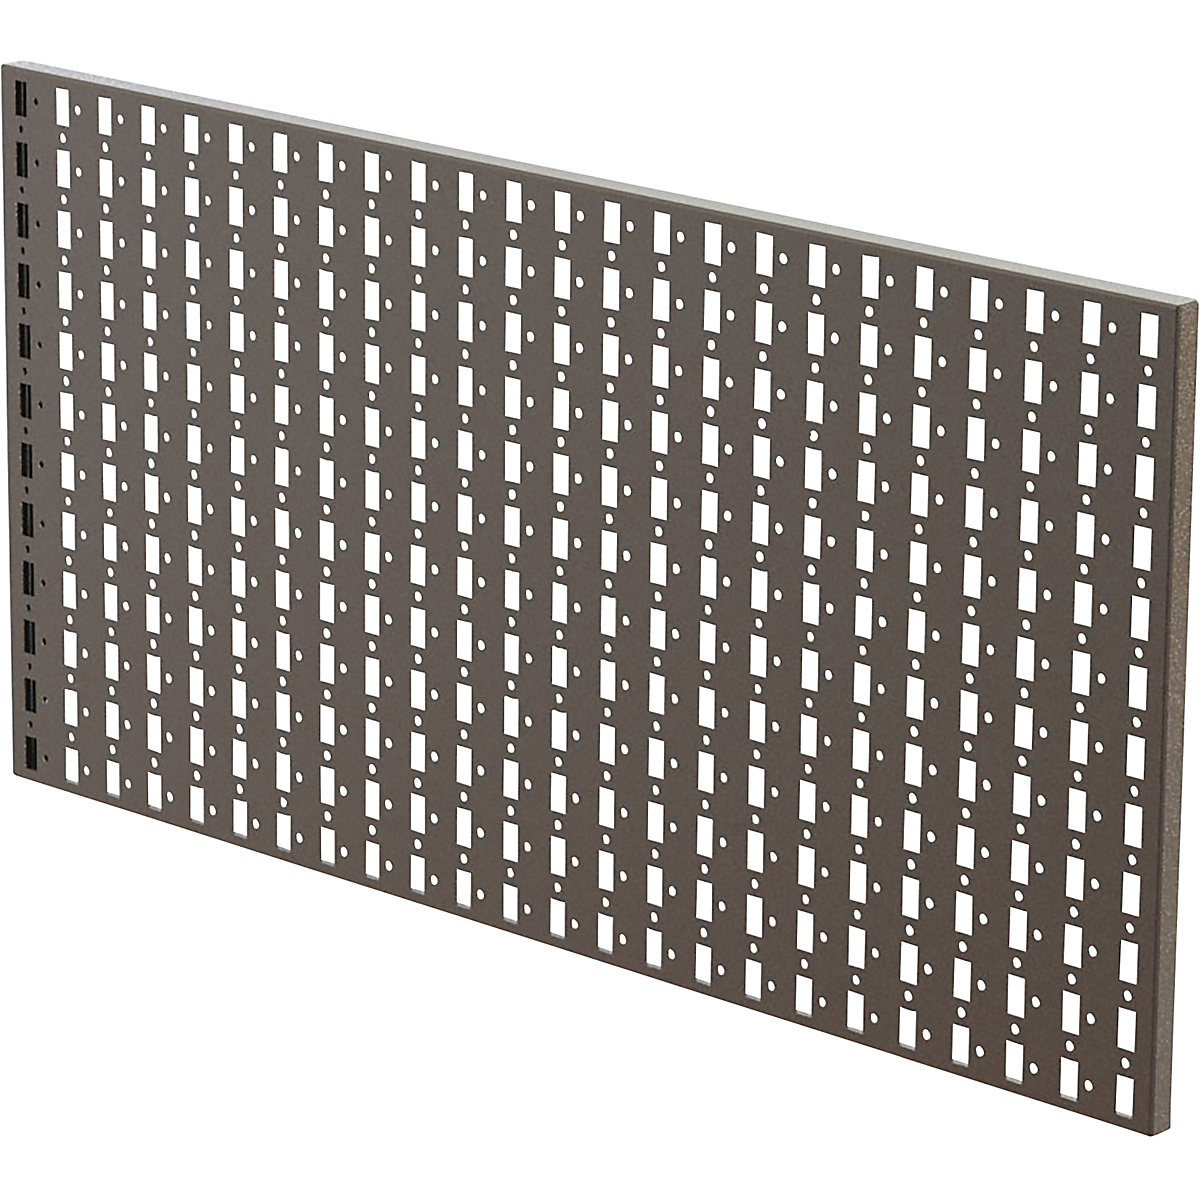 Stainless steel perforated panel